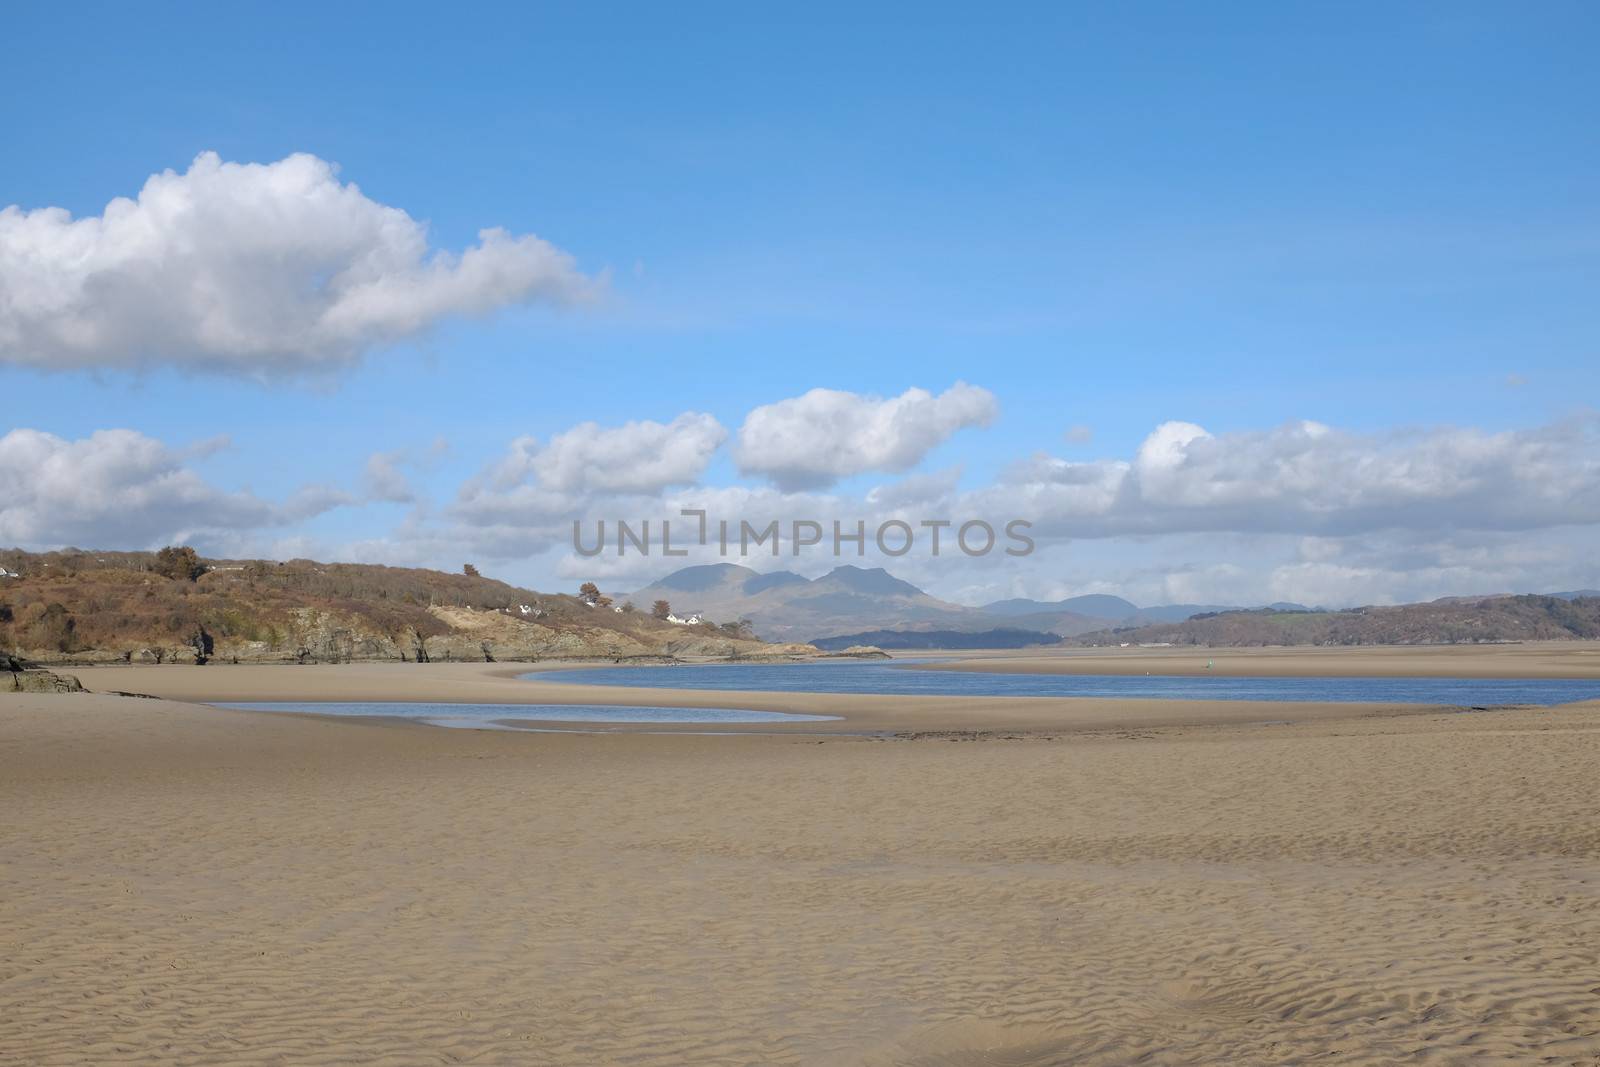 A deserted beach at low tide in an estuary at Borth y Gest, Gwynedd, Wales, UK, looking on to the Moelwyn mountain range, Snowdonia national park, Wales, with a big blue sky and white clouds.